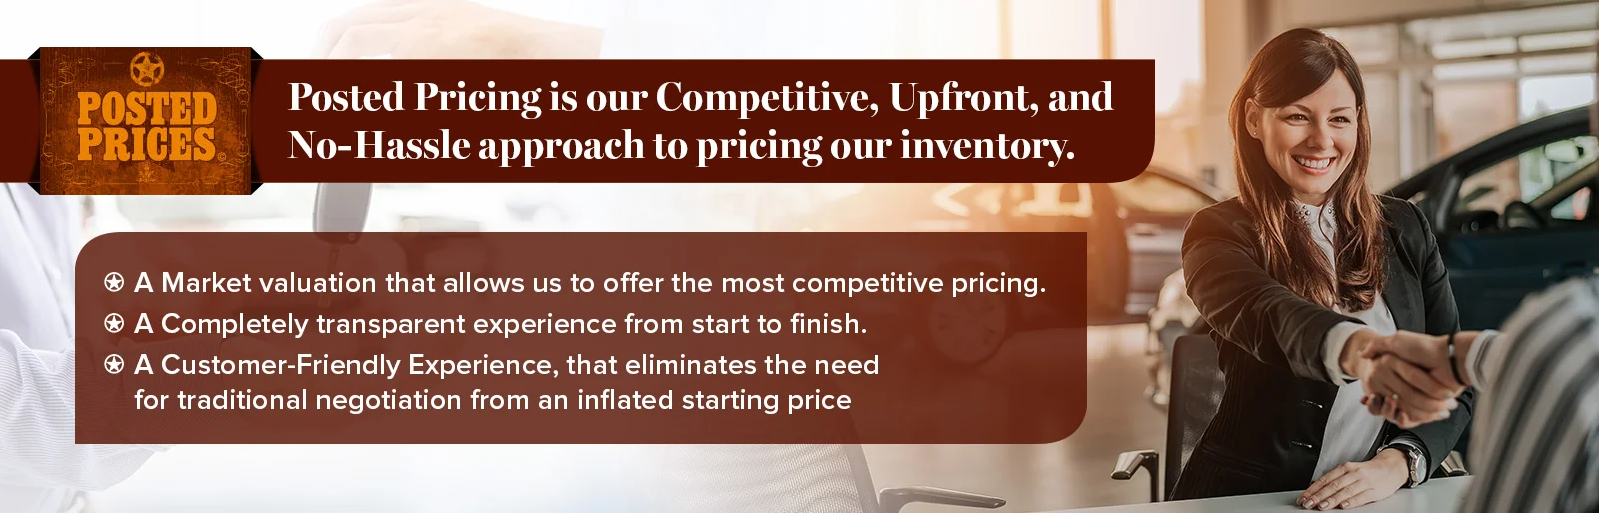 Our upfront Posted Pricing philosophy